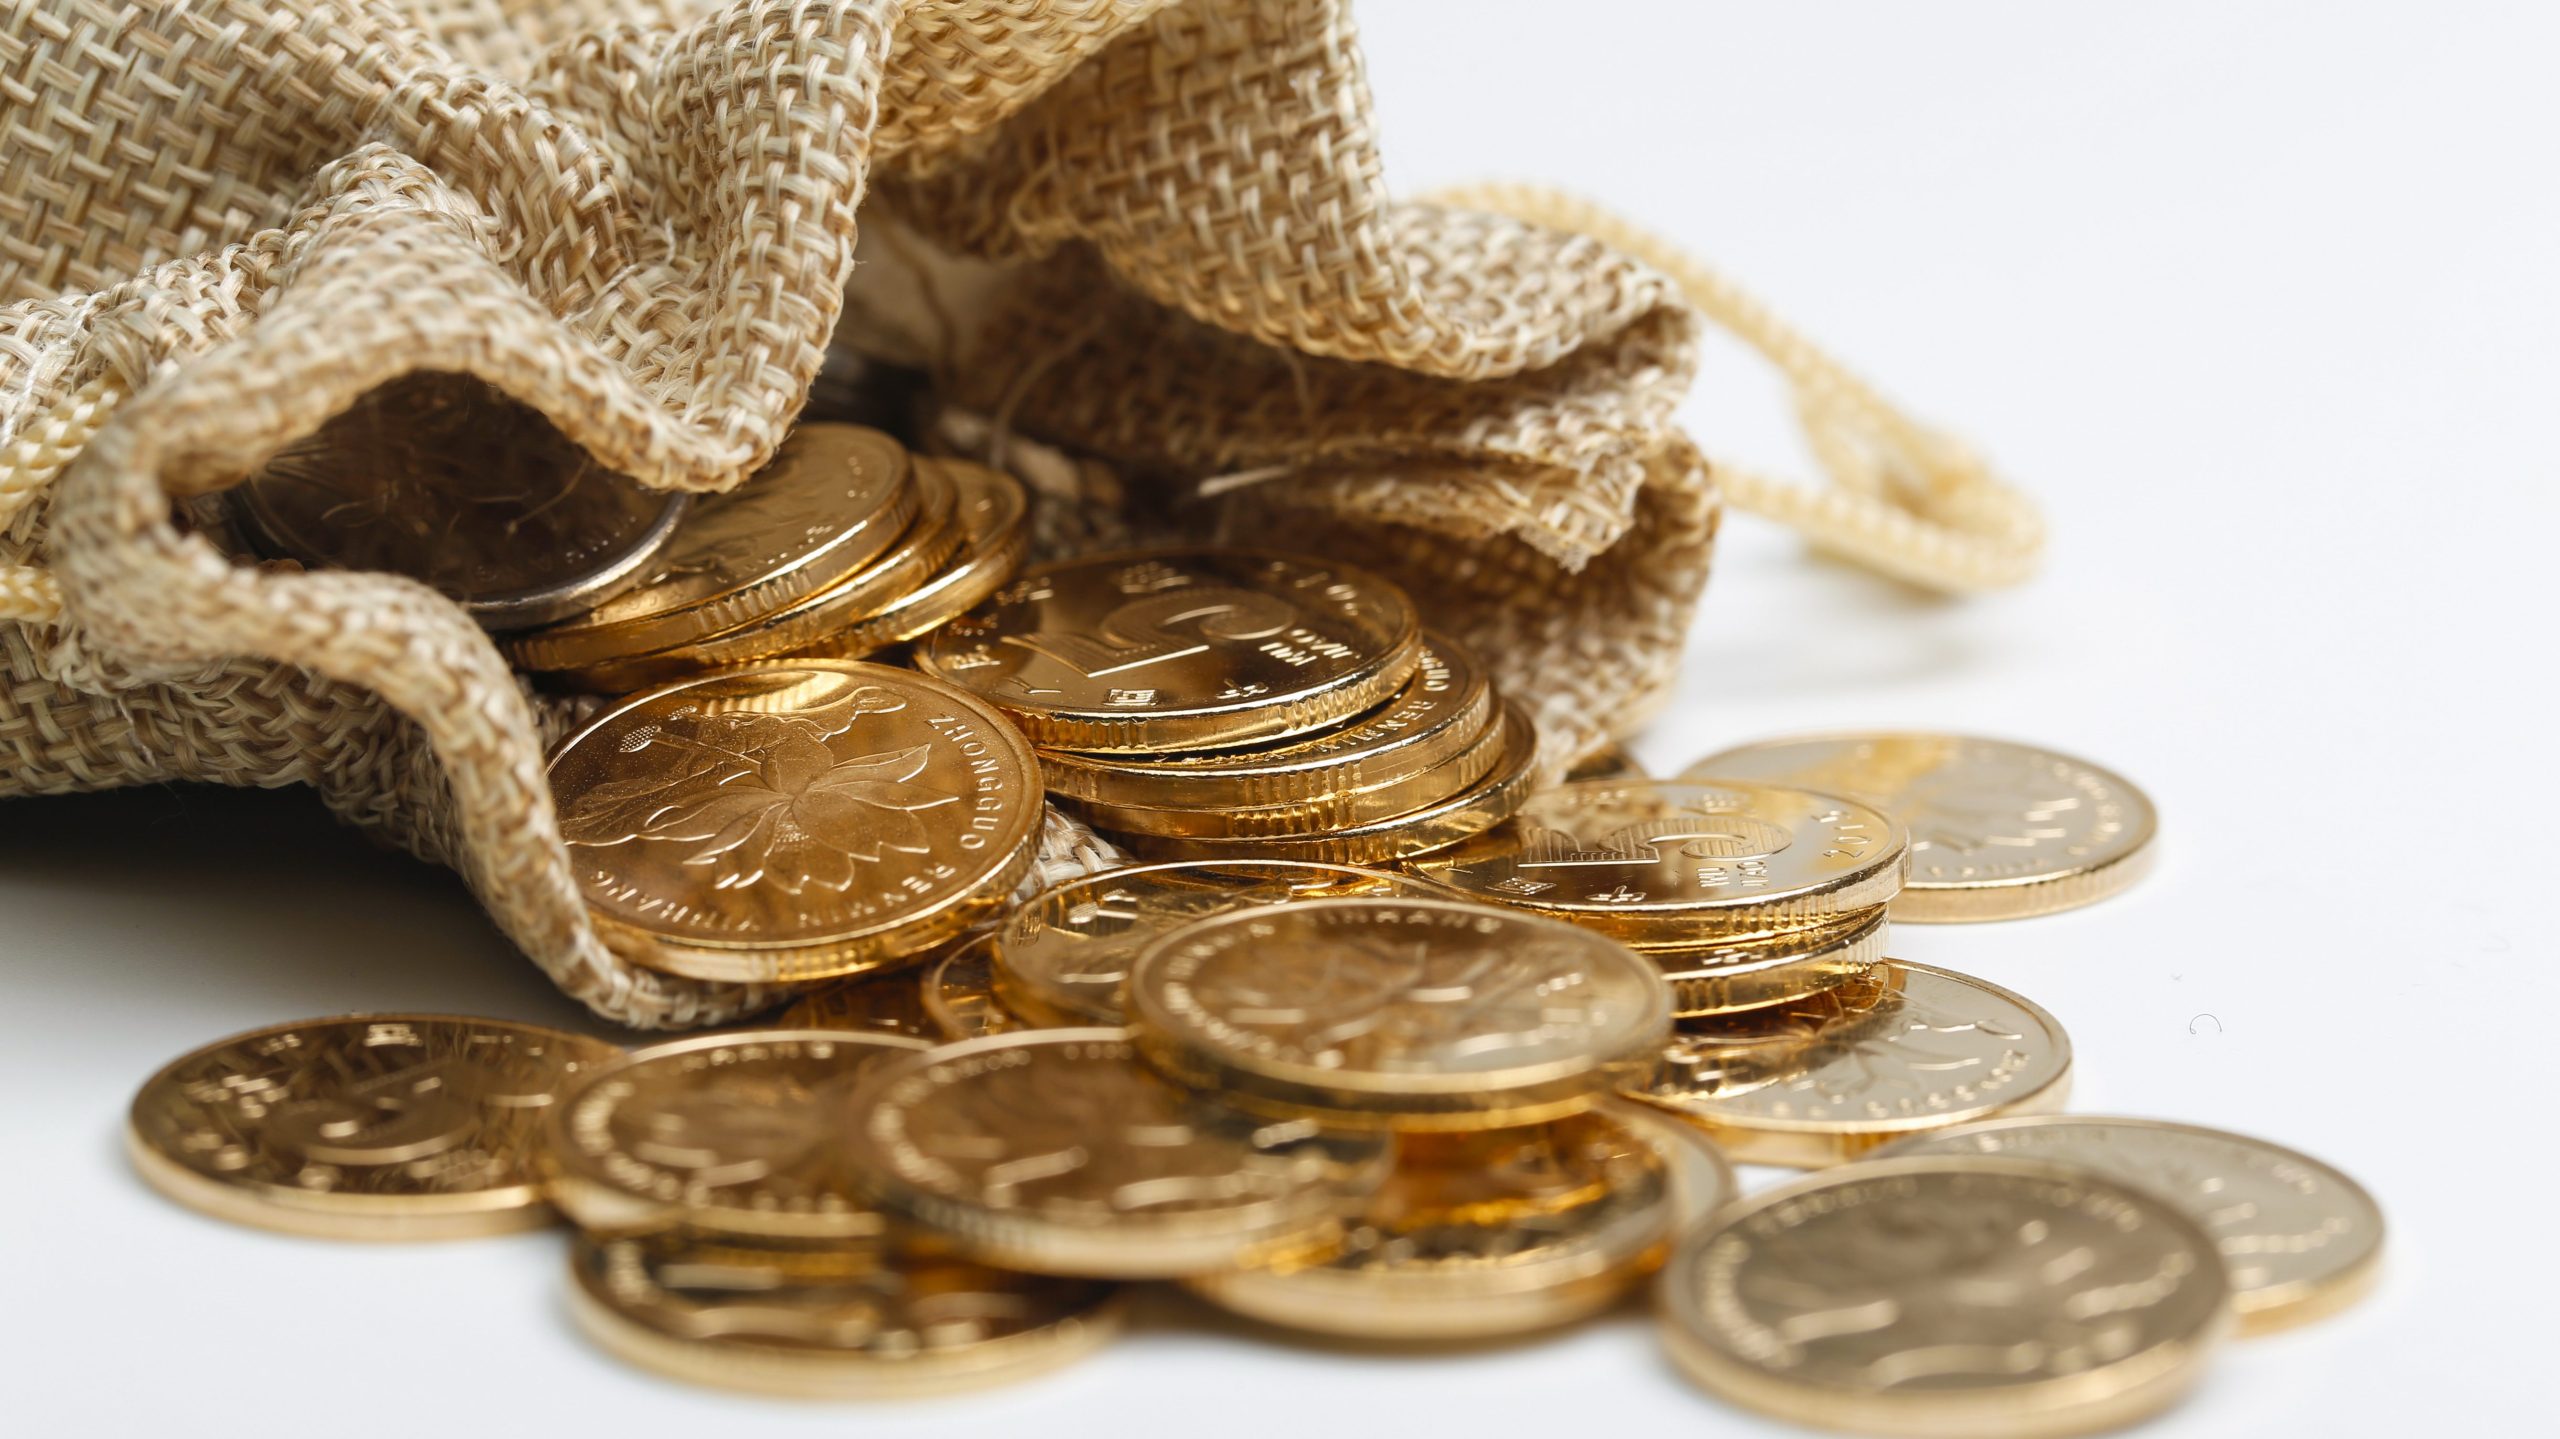 Golden RMB coins In cloth bag